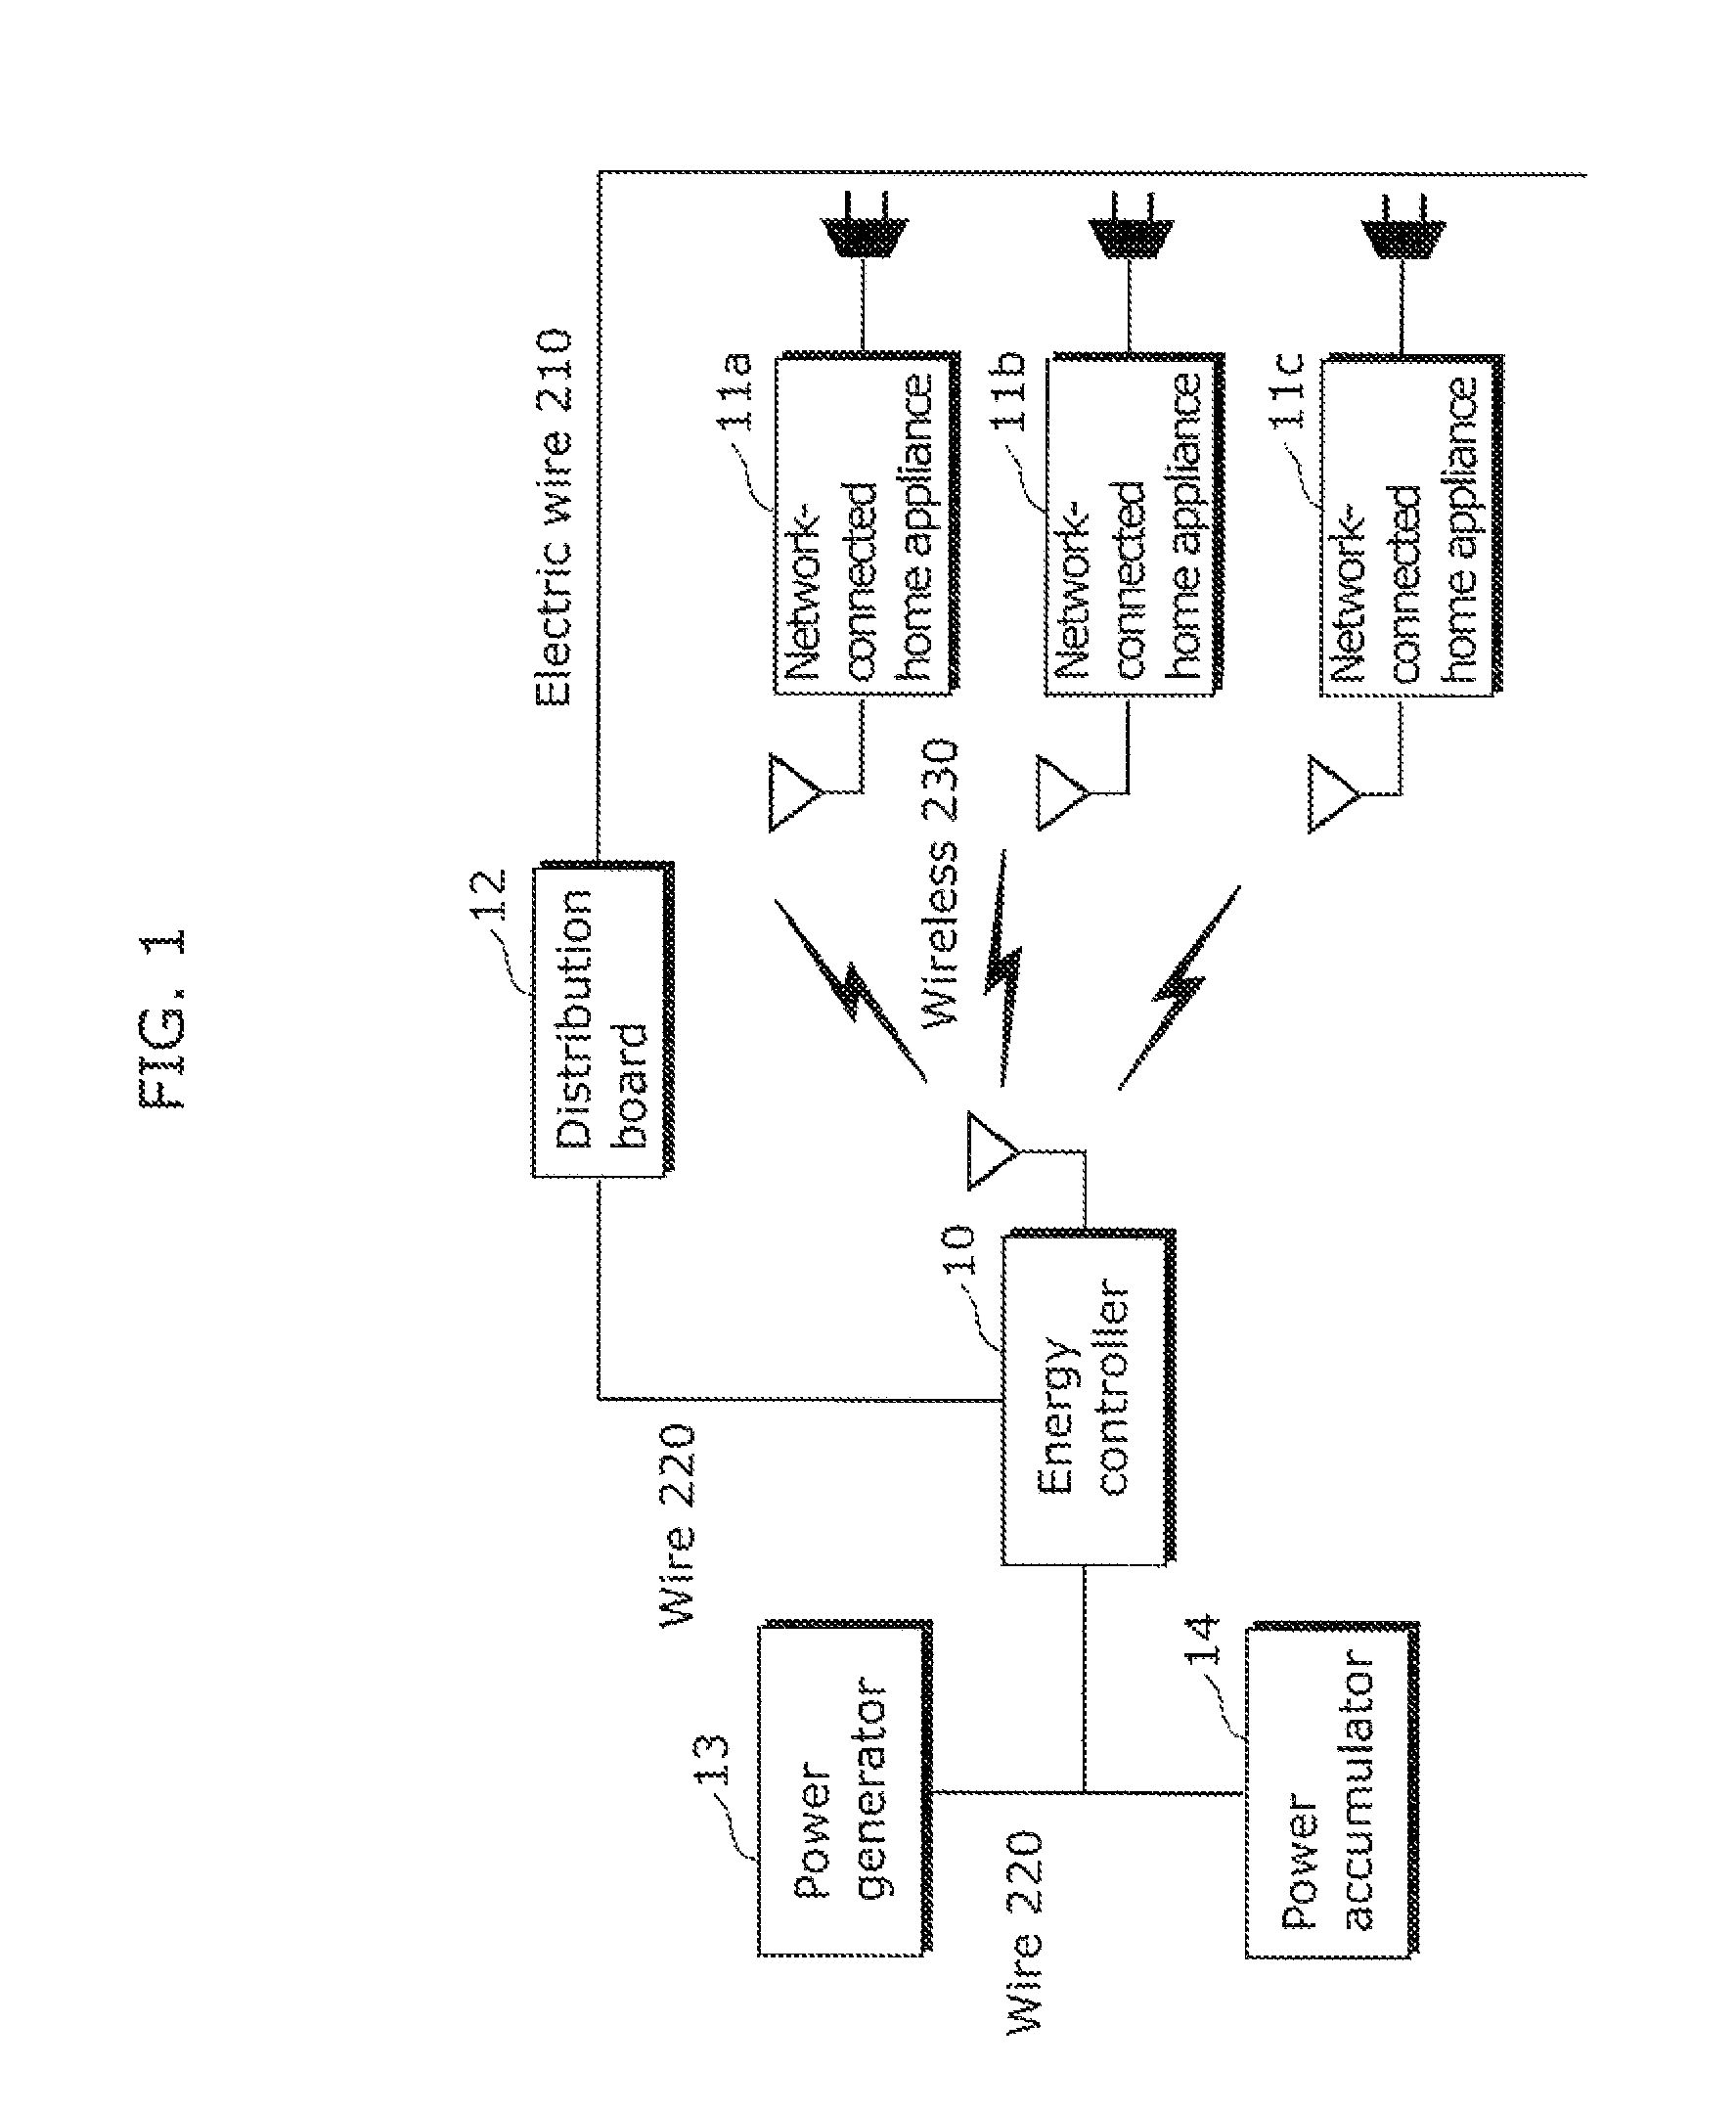 Power control device for home appliances